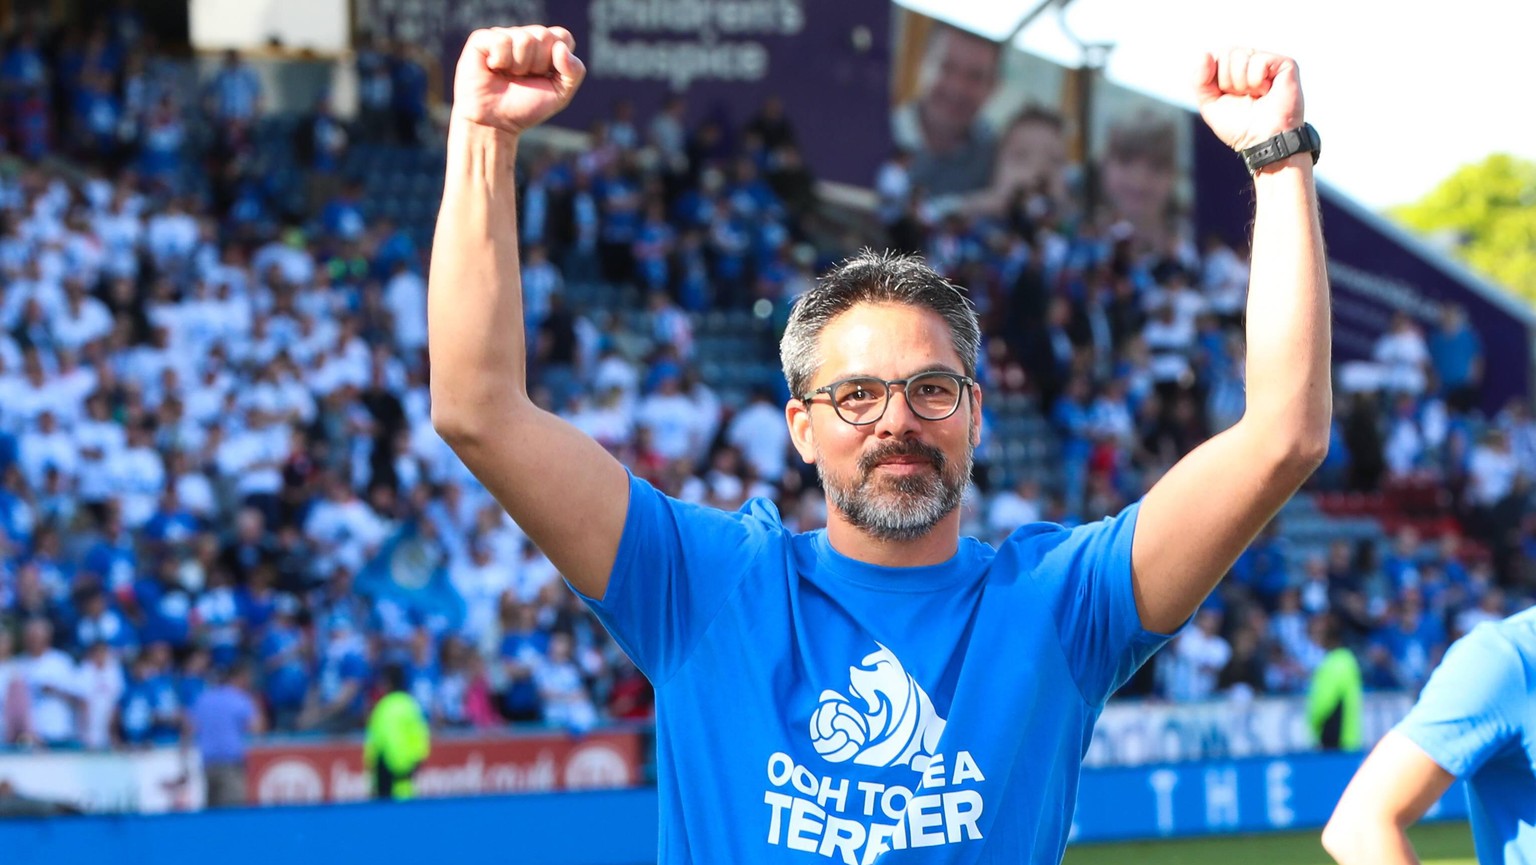 Huddersfield Town manager David Wagner waves at fans after during the Premier League match between Huddersfield Town and Arsenal at the John Smith s Stadium, Huddersfield, England on 13 May 2018. PUBL ...